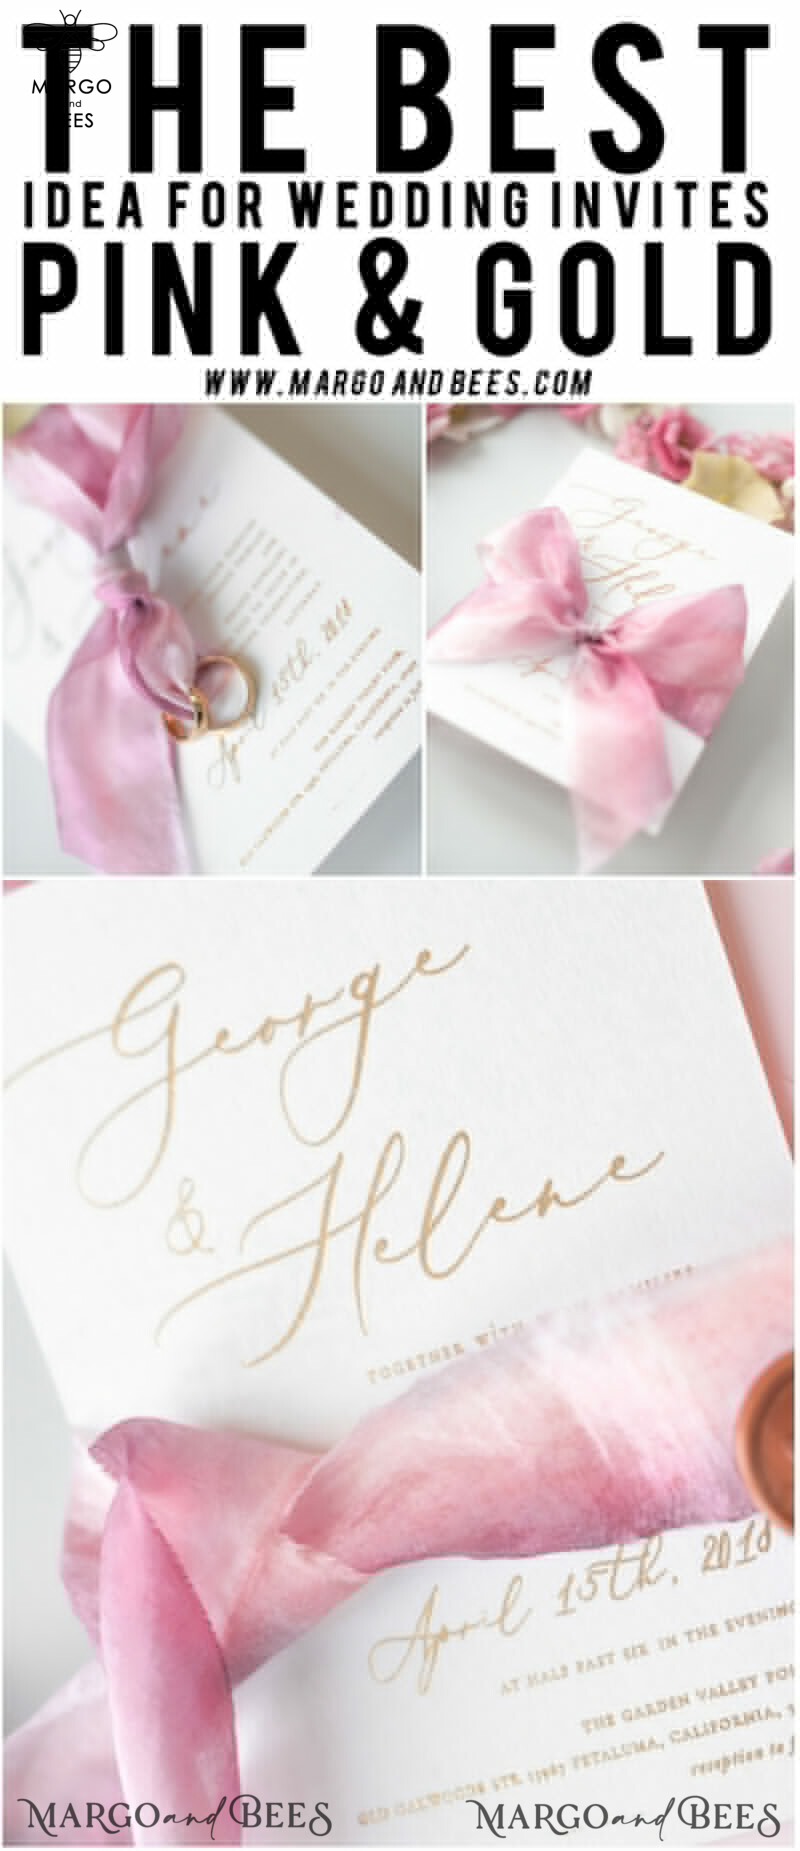 Elegant Personalized Wedding Invitations Romantic Stationery with Vintage Garden Roses and  Handmade Silk Bow Gold Foil Letters  Blush Pink Envelope -48